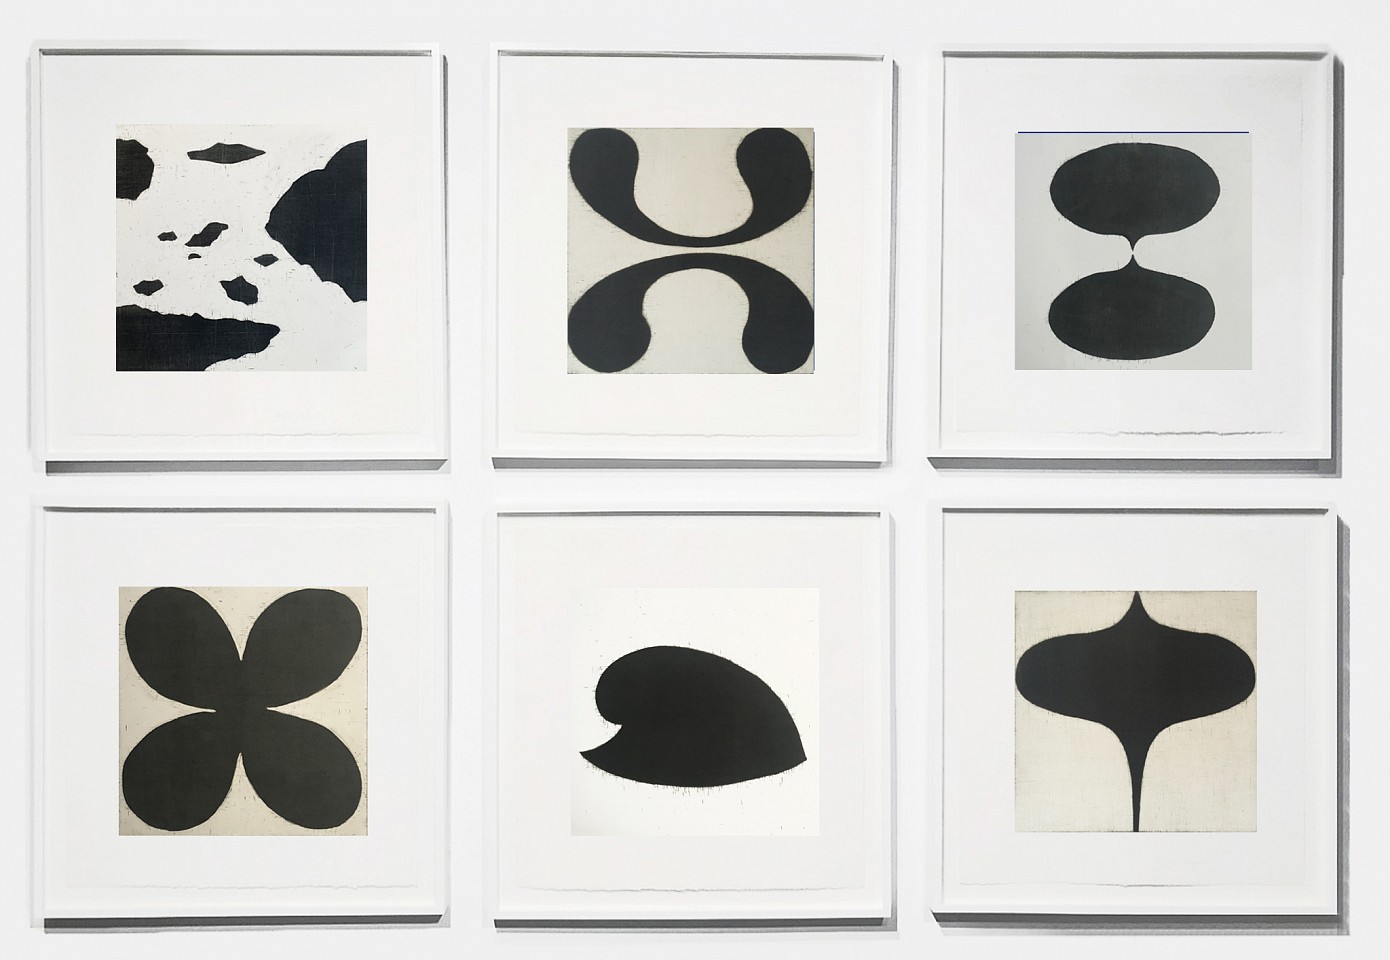 Isabel Bigelow
Black and White Monoprint Installation, 2022
monoprint, 25.5 x 25 inches framed each, installation is approximately 53 x 79 inches